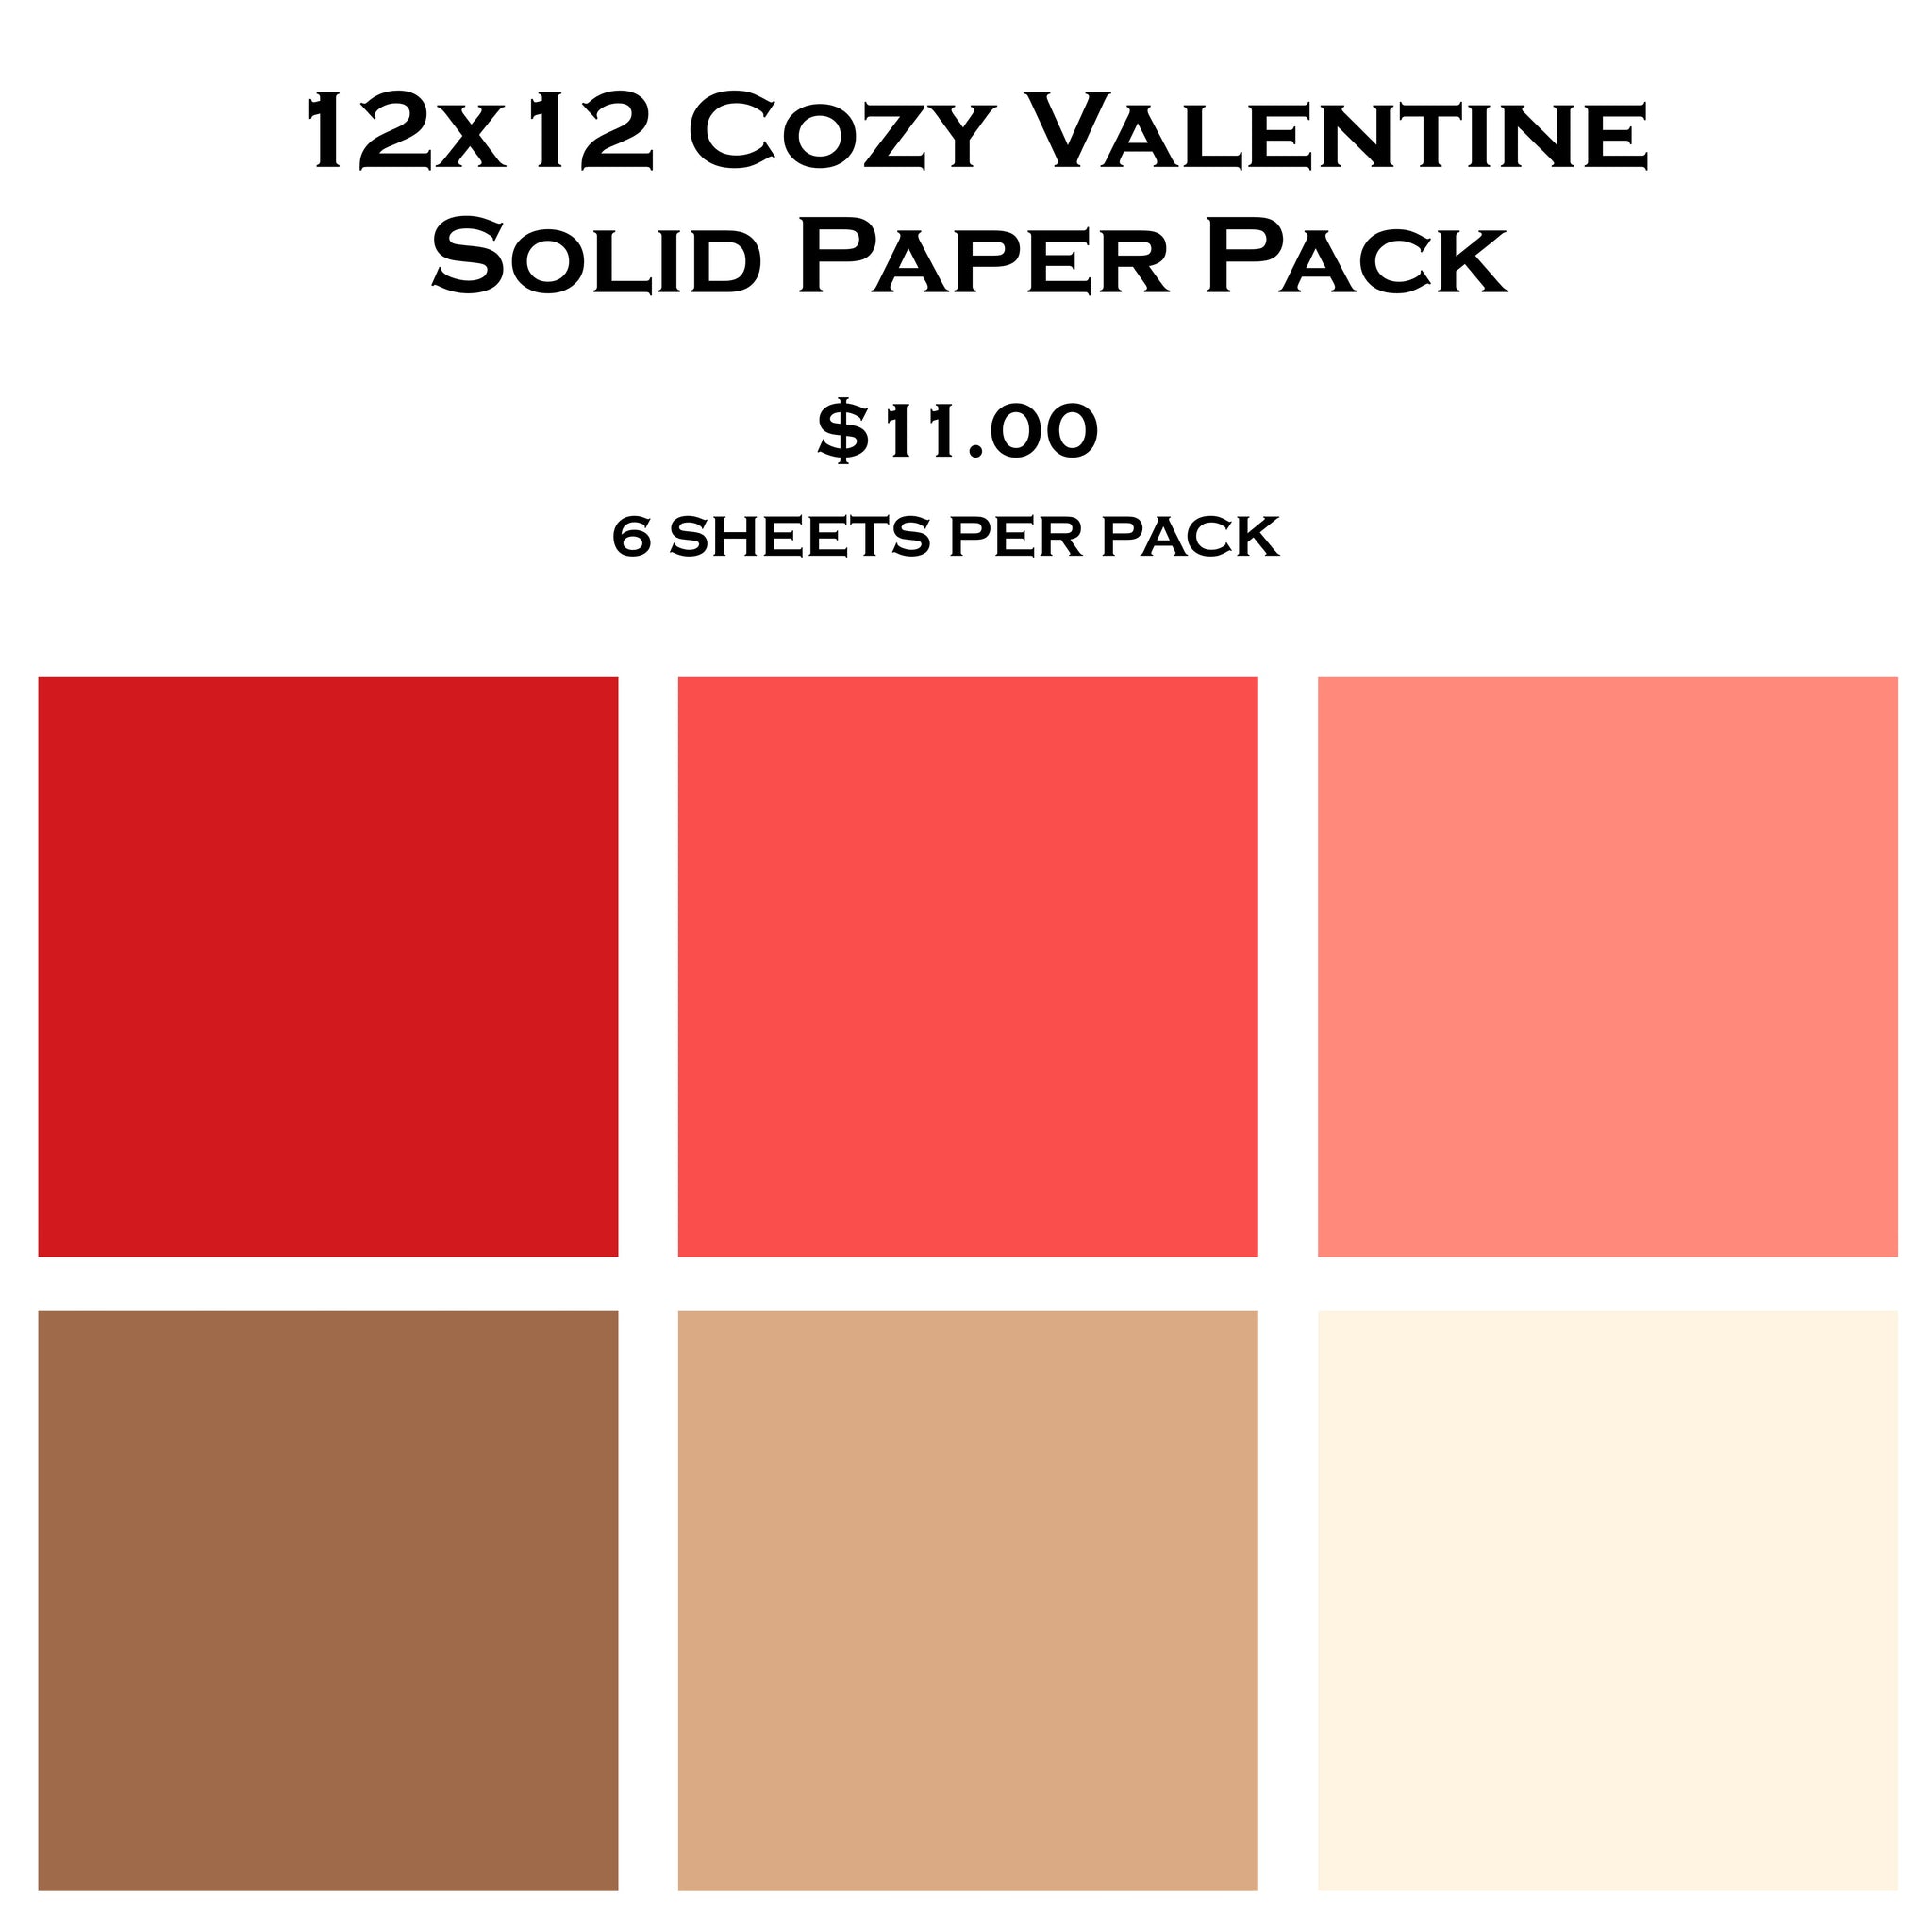 Cozy Valentine 12x12 Solid Paper Pack